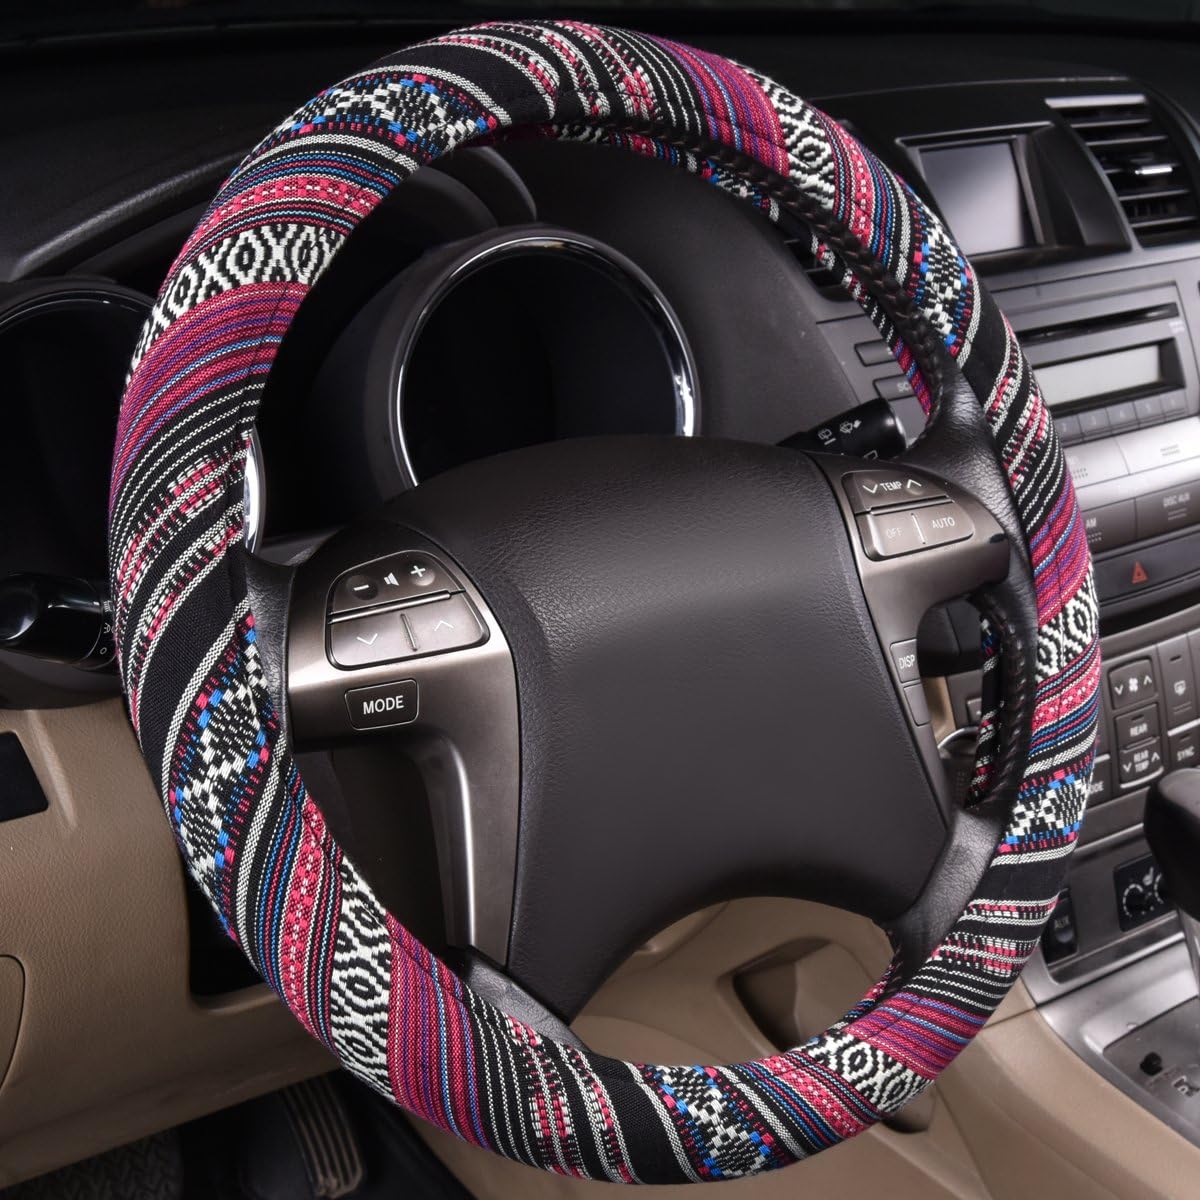 CAR Pass Baja Saddle Blanket Boho Paisley Stripes Ethnic Style Car Interior Combo, Universal Fit for Car,SUV,Sedan,Truck,Jeep,Airbag Compatible 7 Pieces